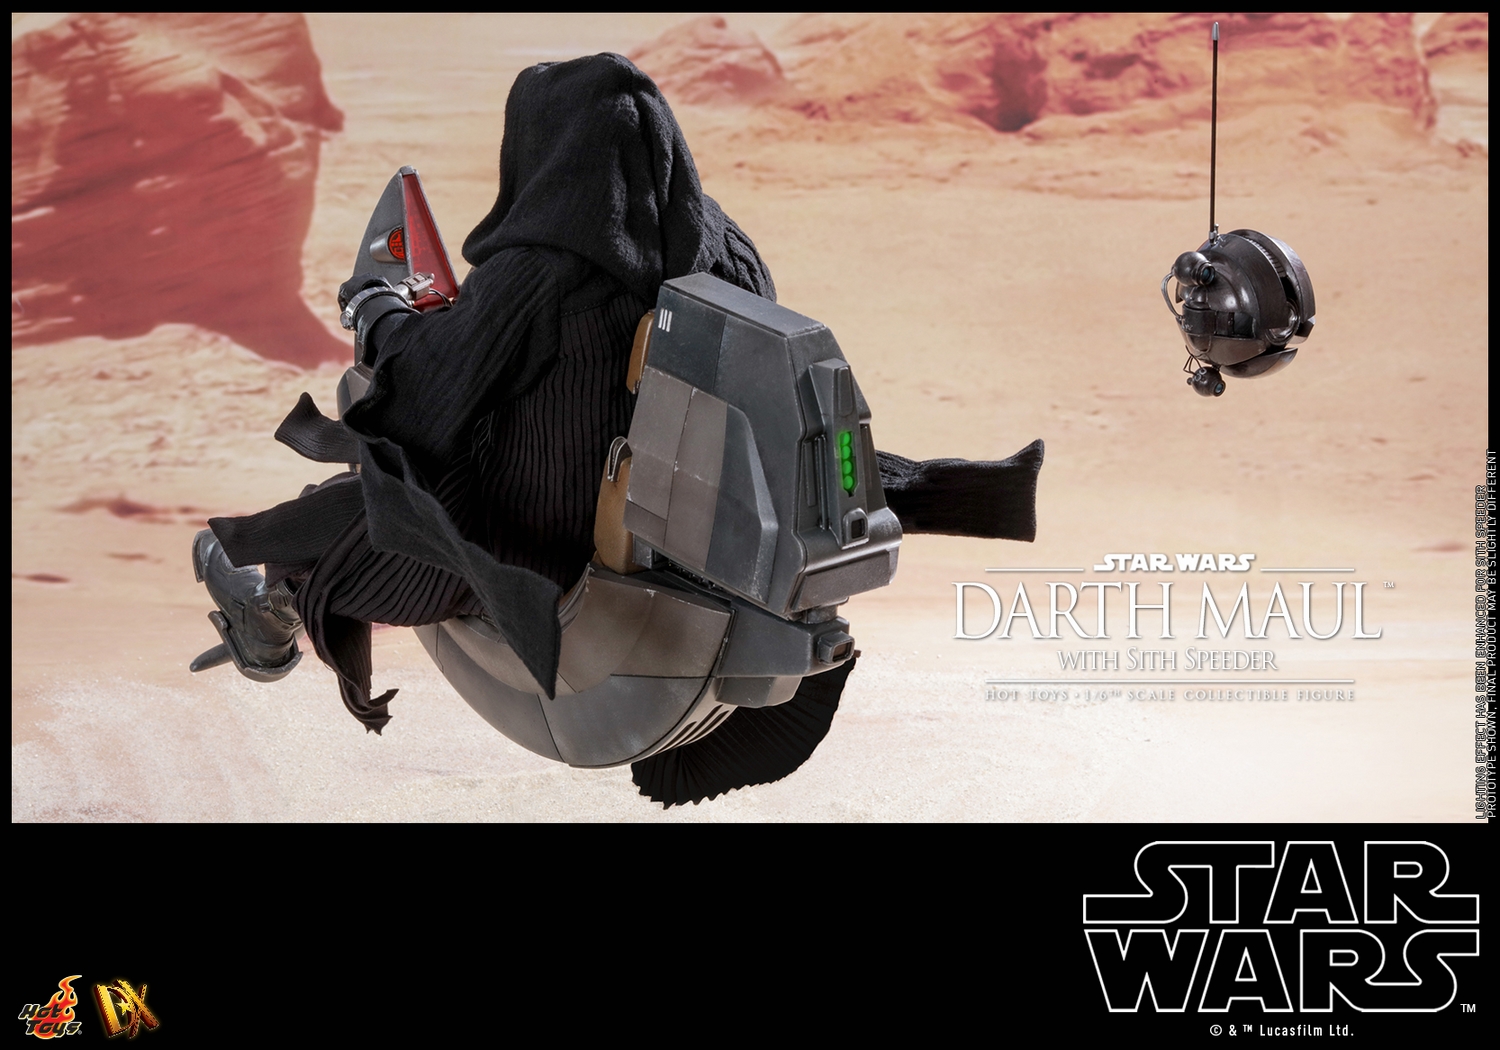 hot-toys-star-wars-1-6-darth-maul-with-sith-speeder-dx17-collectible-figure-025.jpg